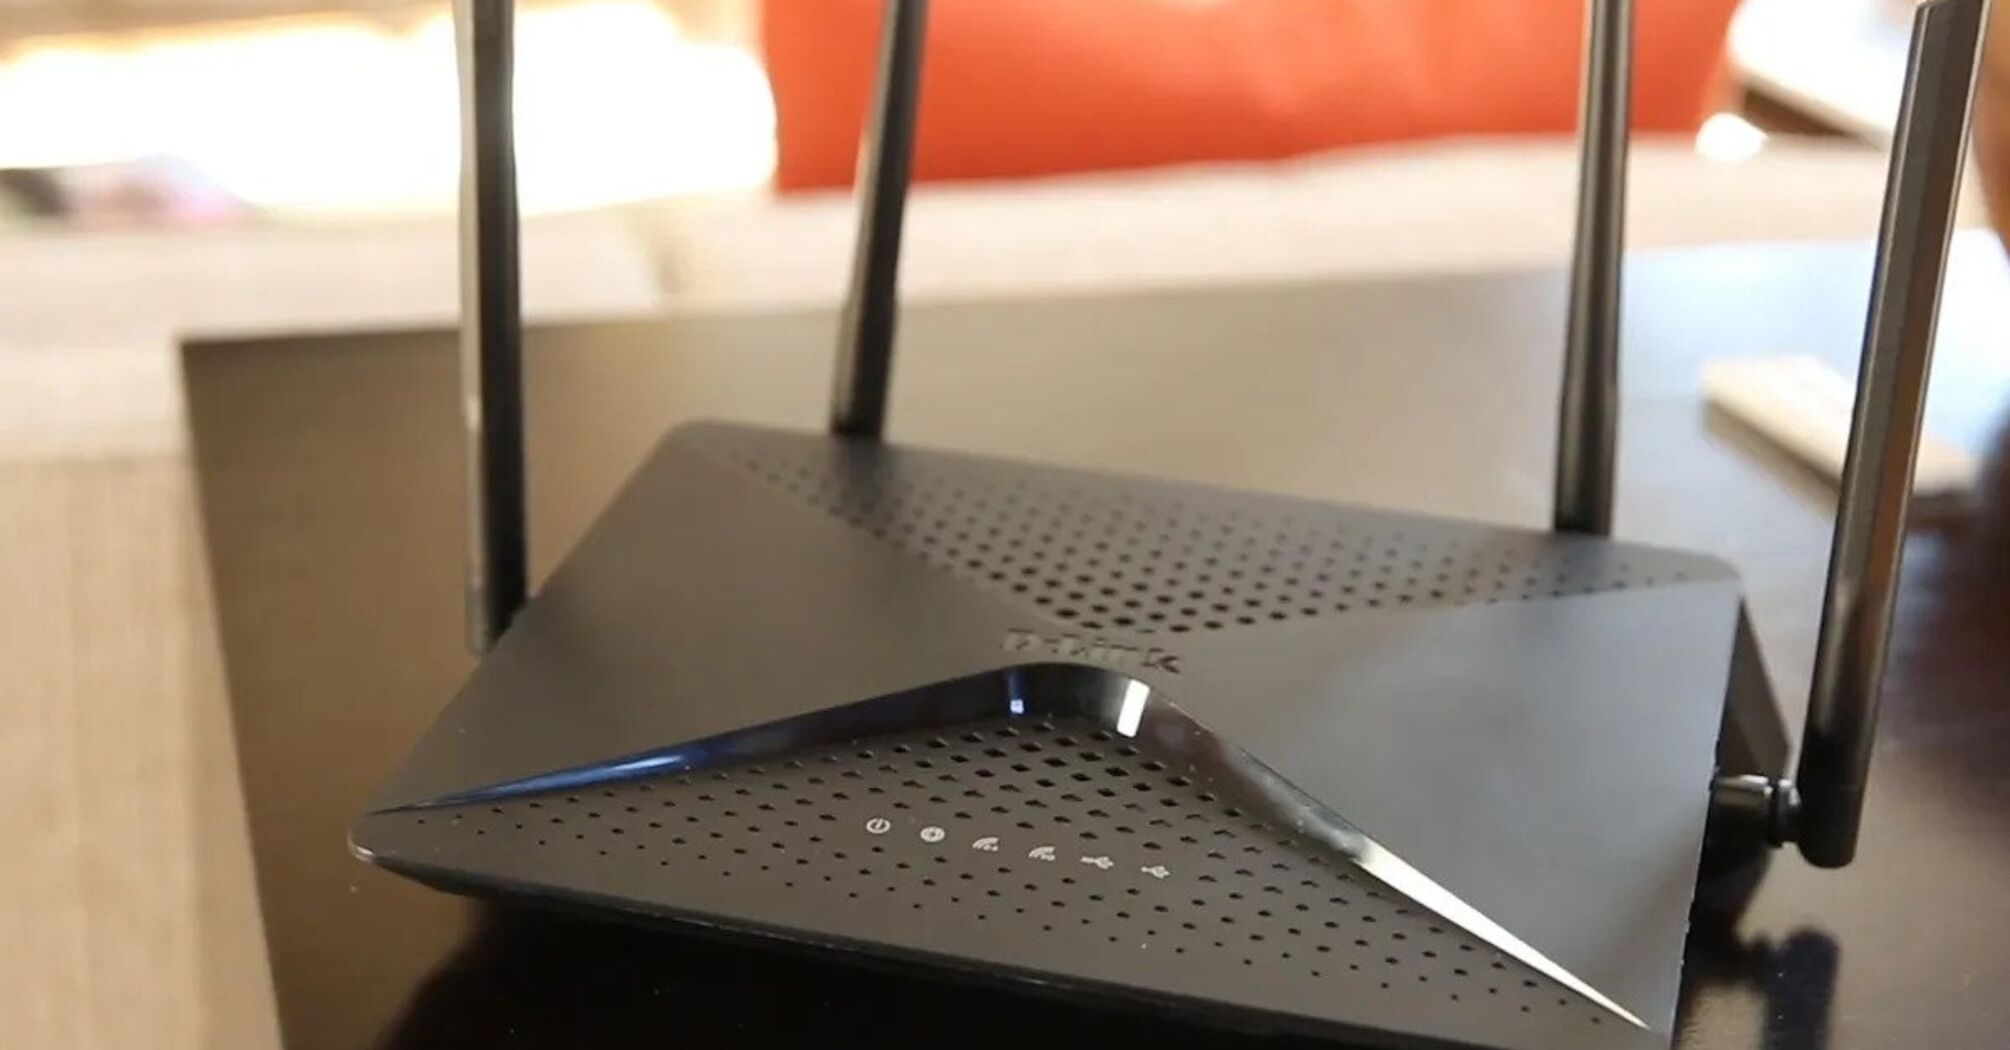 How to increase the speed of a WI-FI router